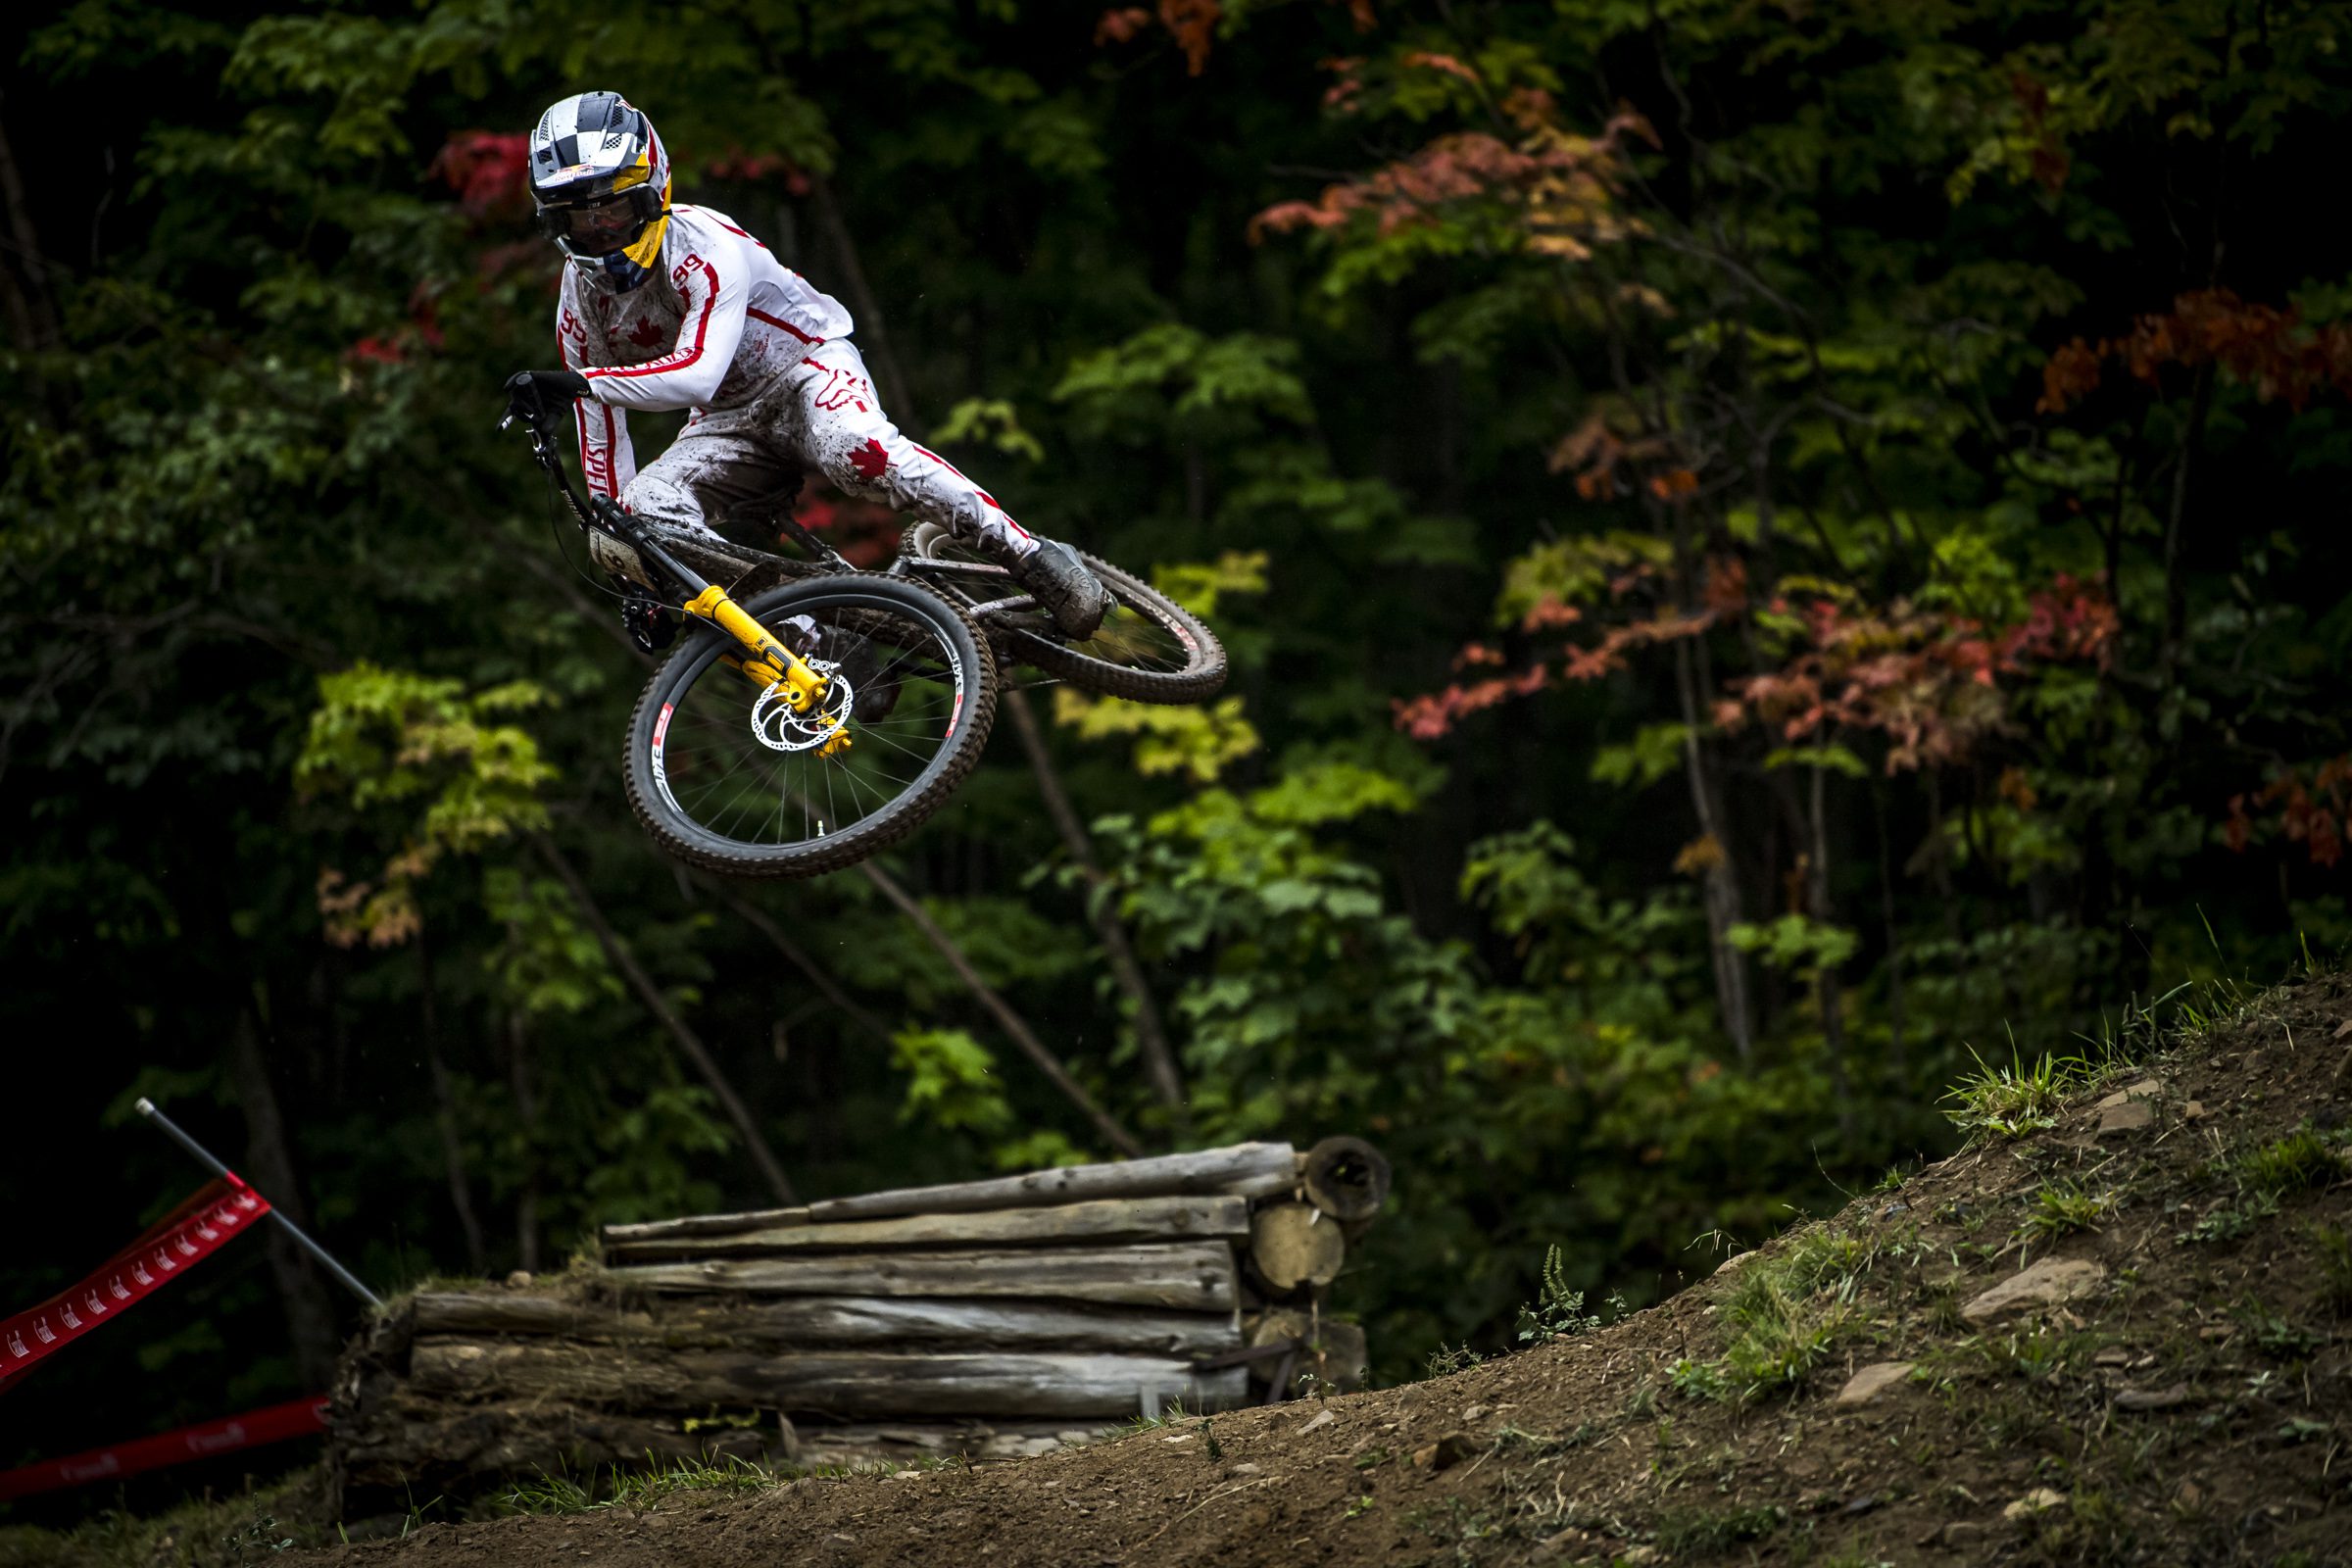 How to watch 2020 UCI mountain bike world championships in Canada